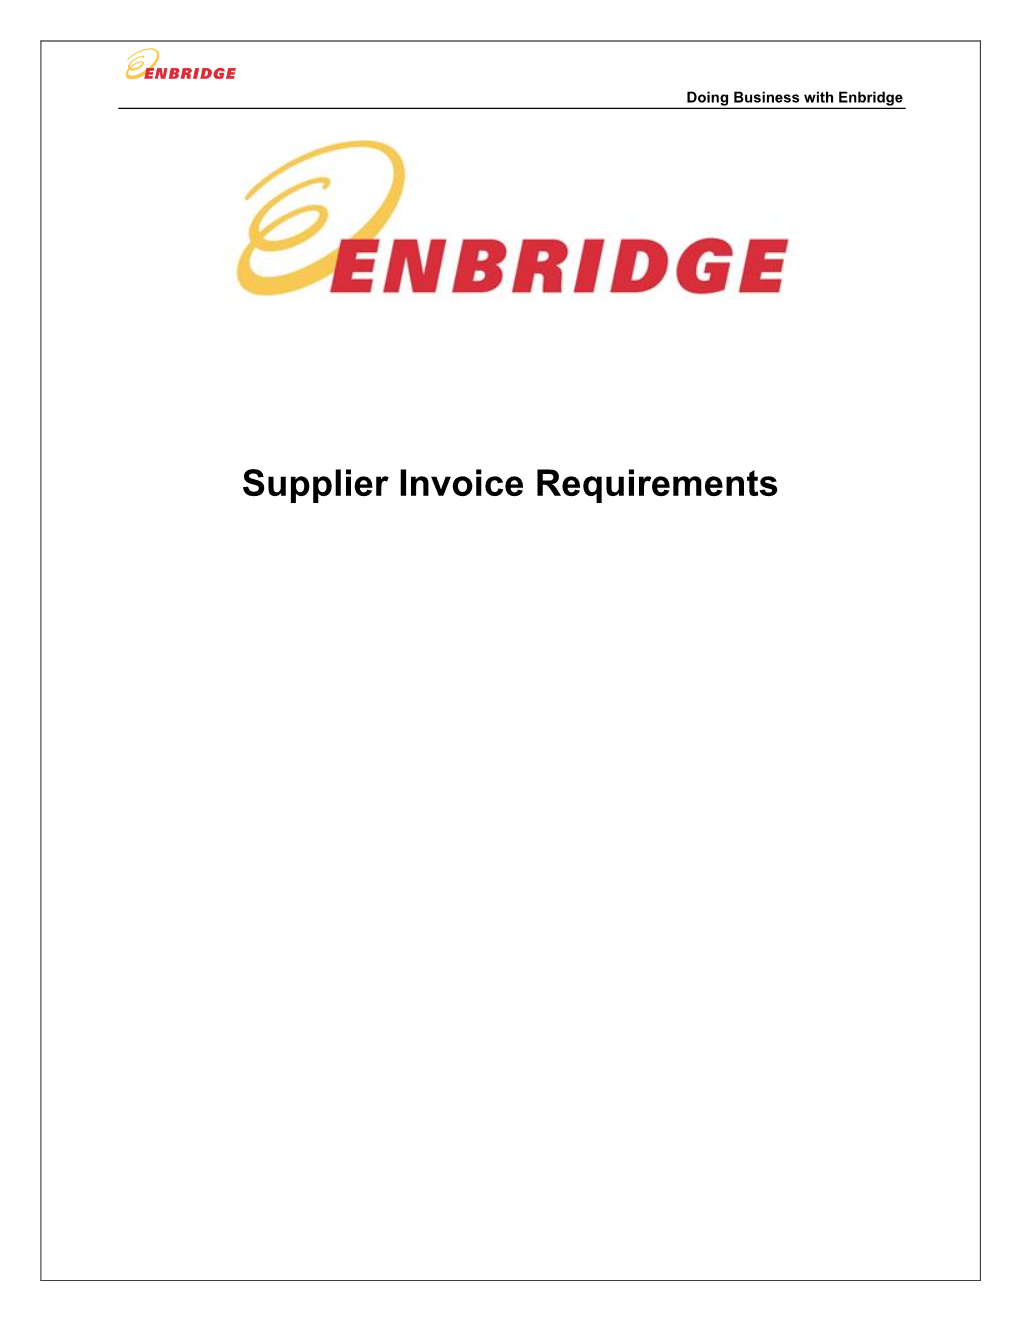 Supplier Invoice Requirements